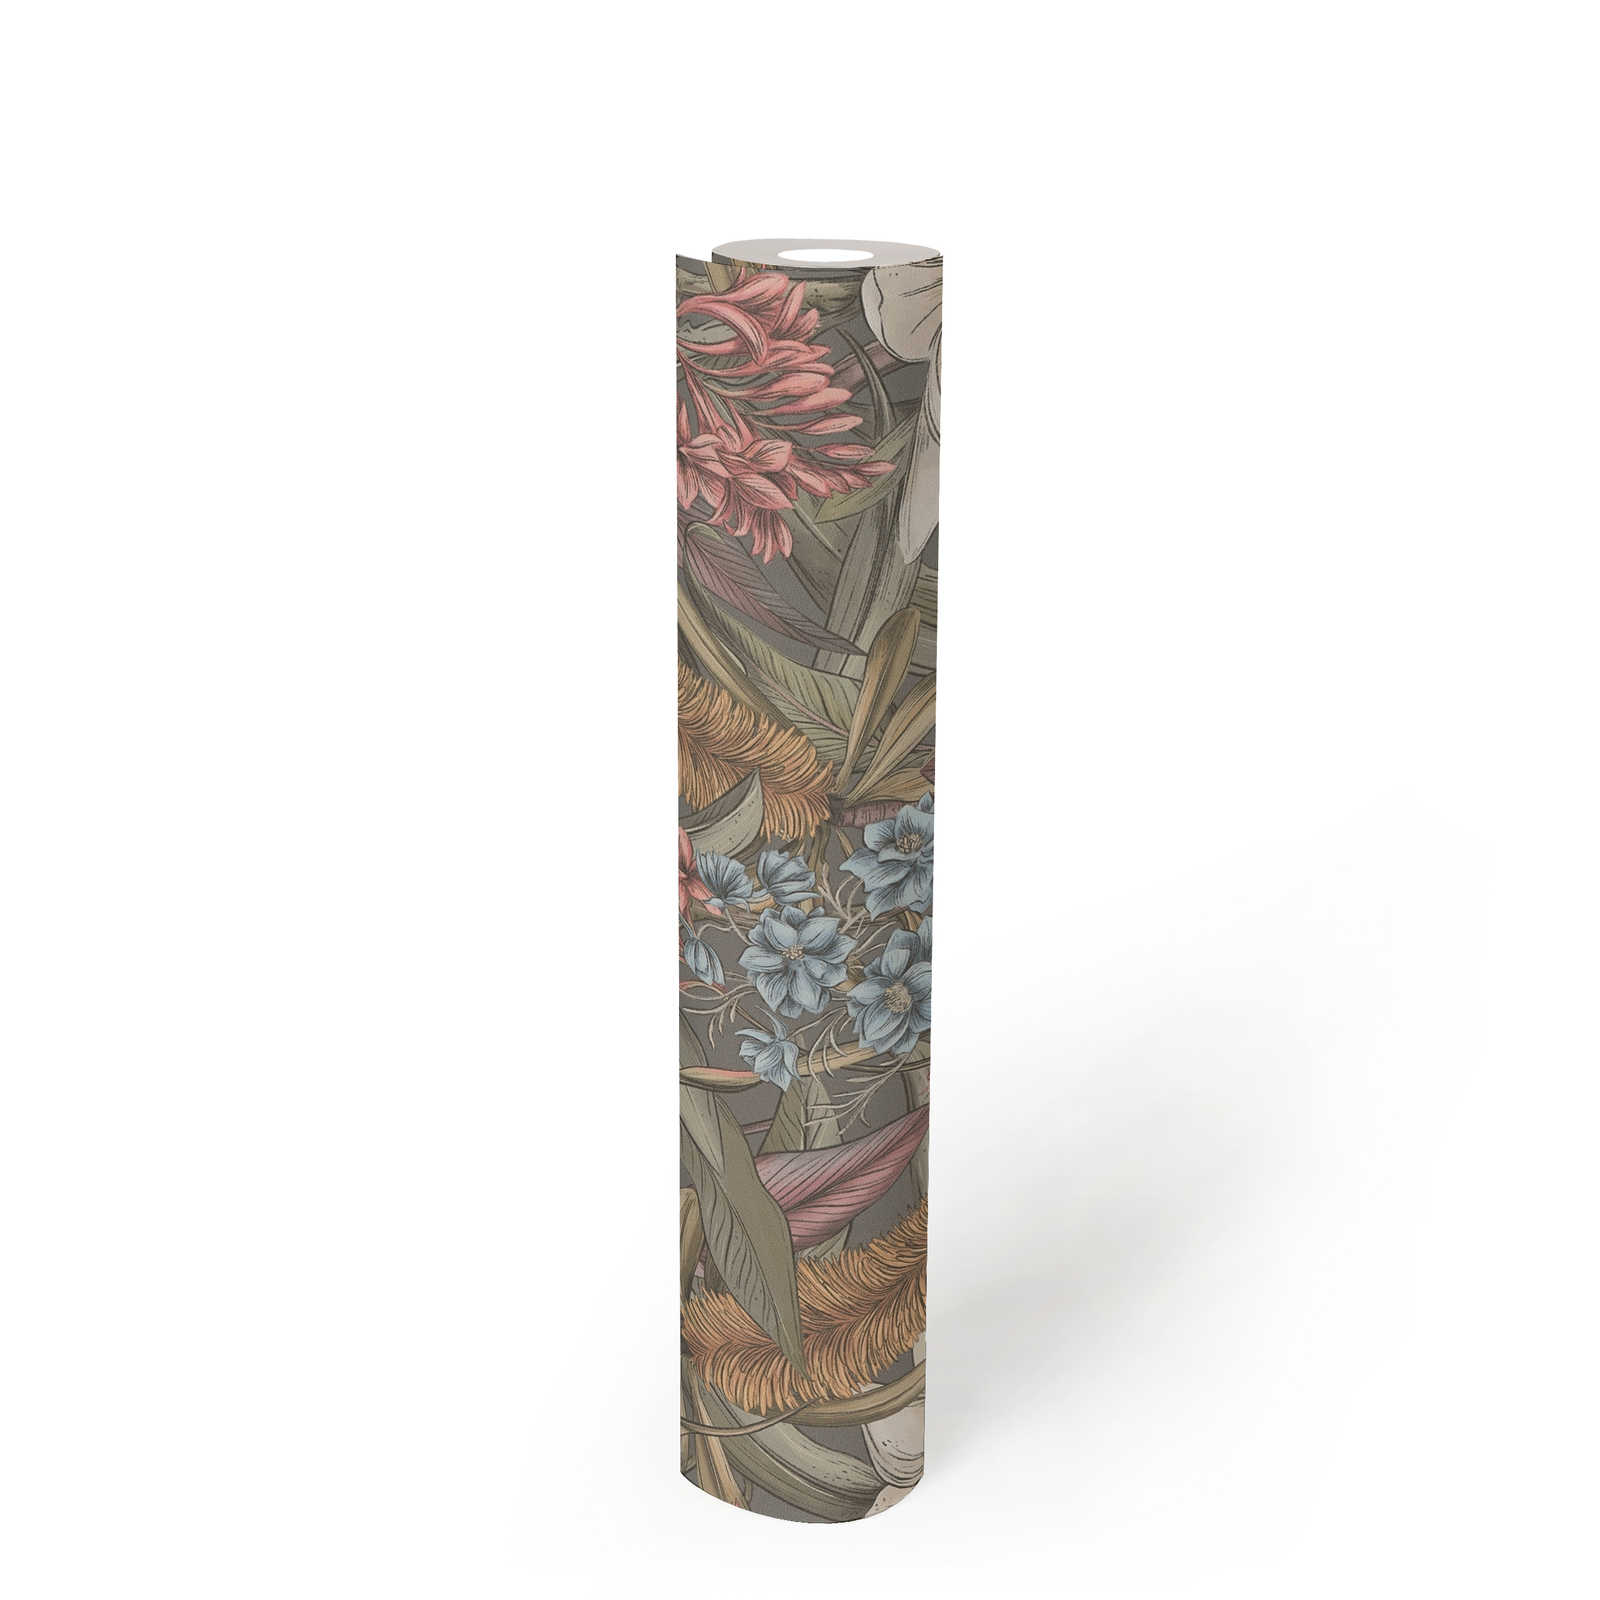             Jungle wallpaper floral with leaves & flowers textured matt - grey, pink, green
        